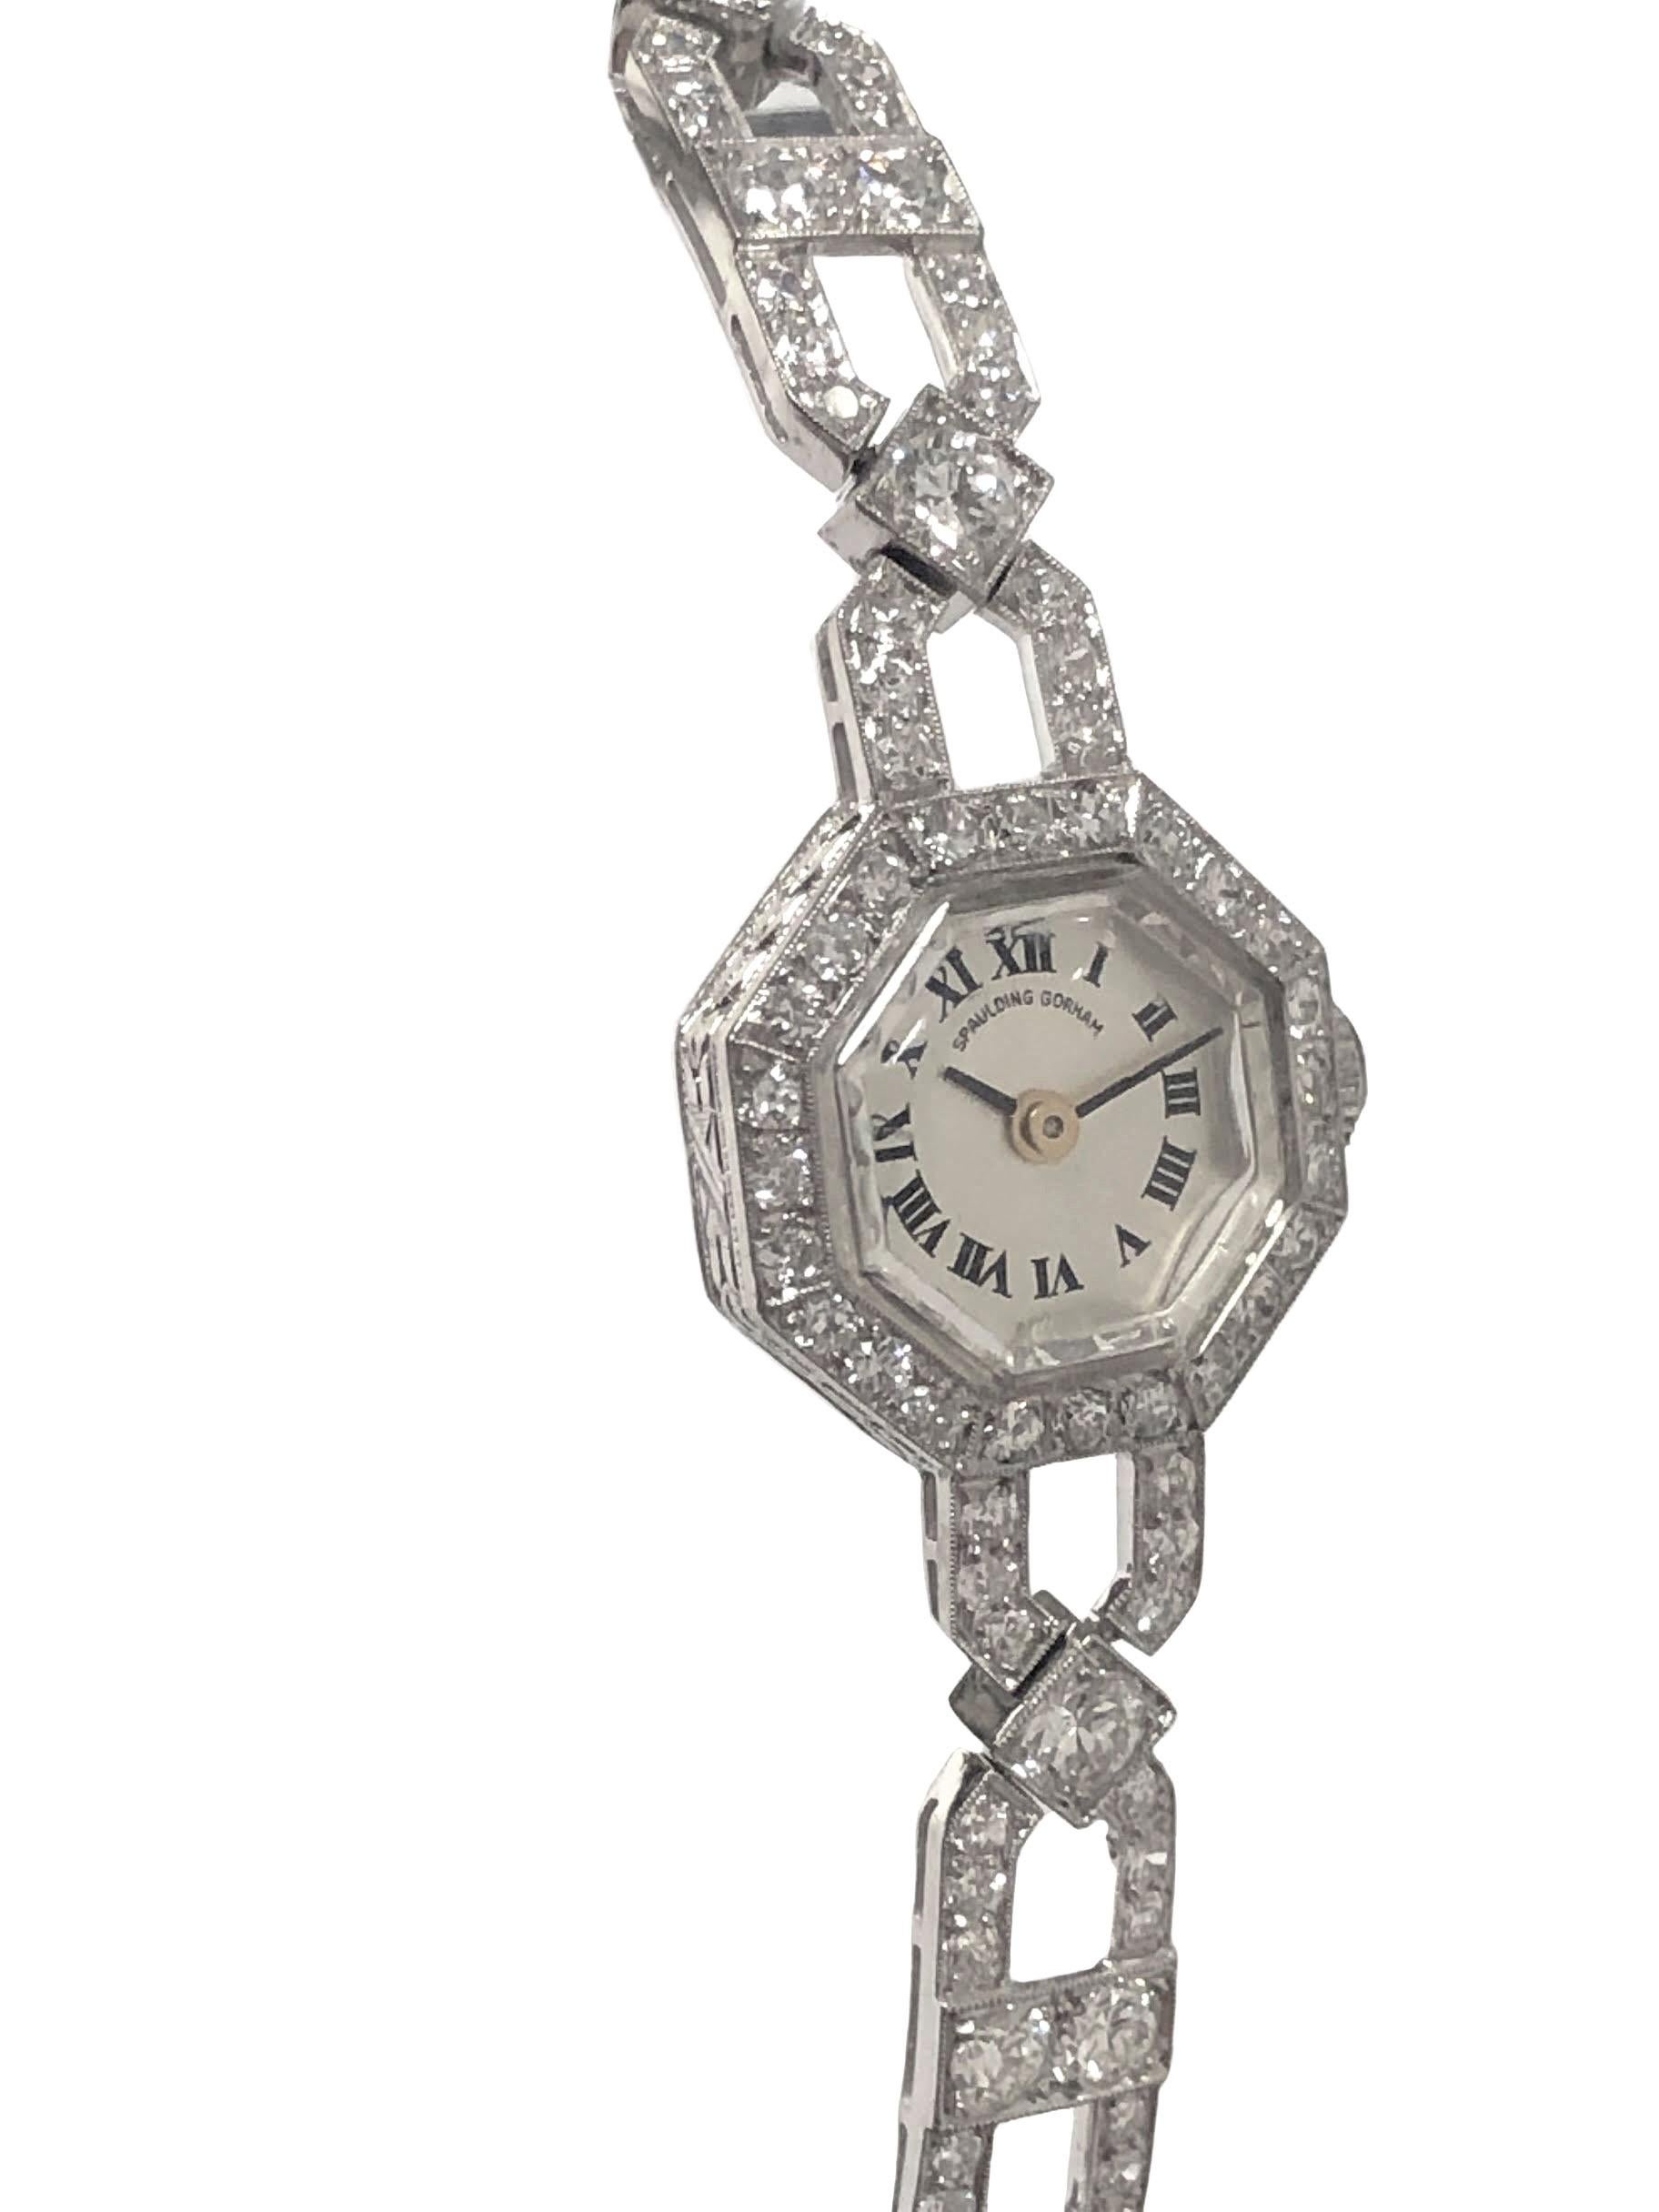 Circa late 1920s Ladies Platinum Bracelet watch Retailed by Spaulding Gorham, 16 M.M. octagon shape 2 piece case with hand engraved design work, Diamond set crown. 17 Jewel Mechanical, manual wind movement by Schultz. Silver Satin dial with Black